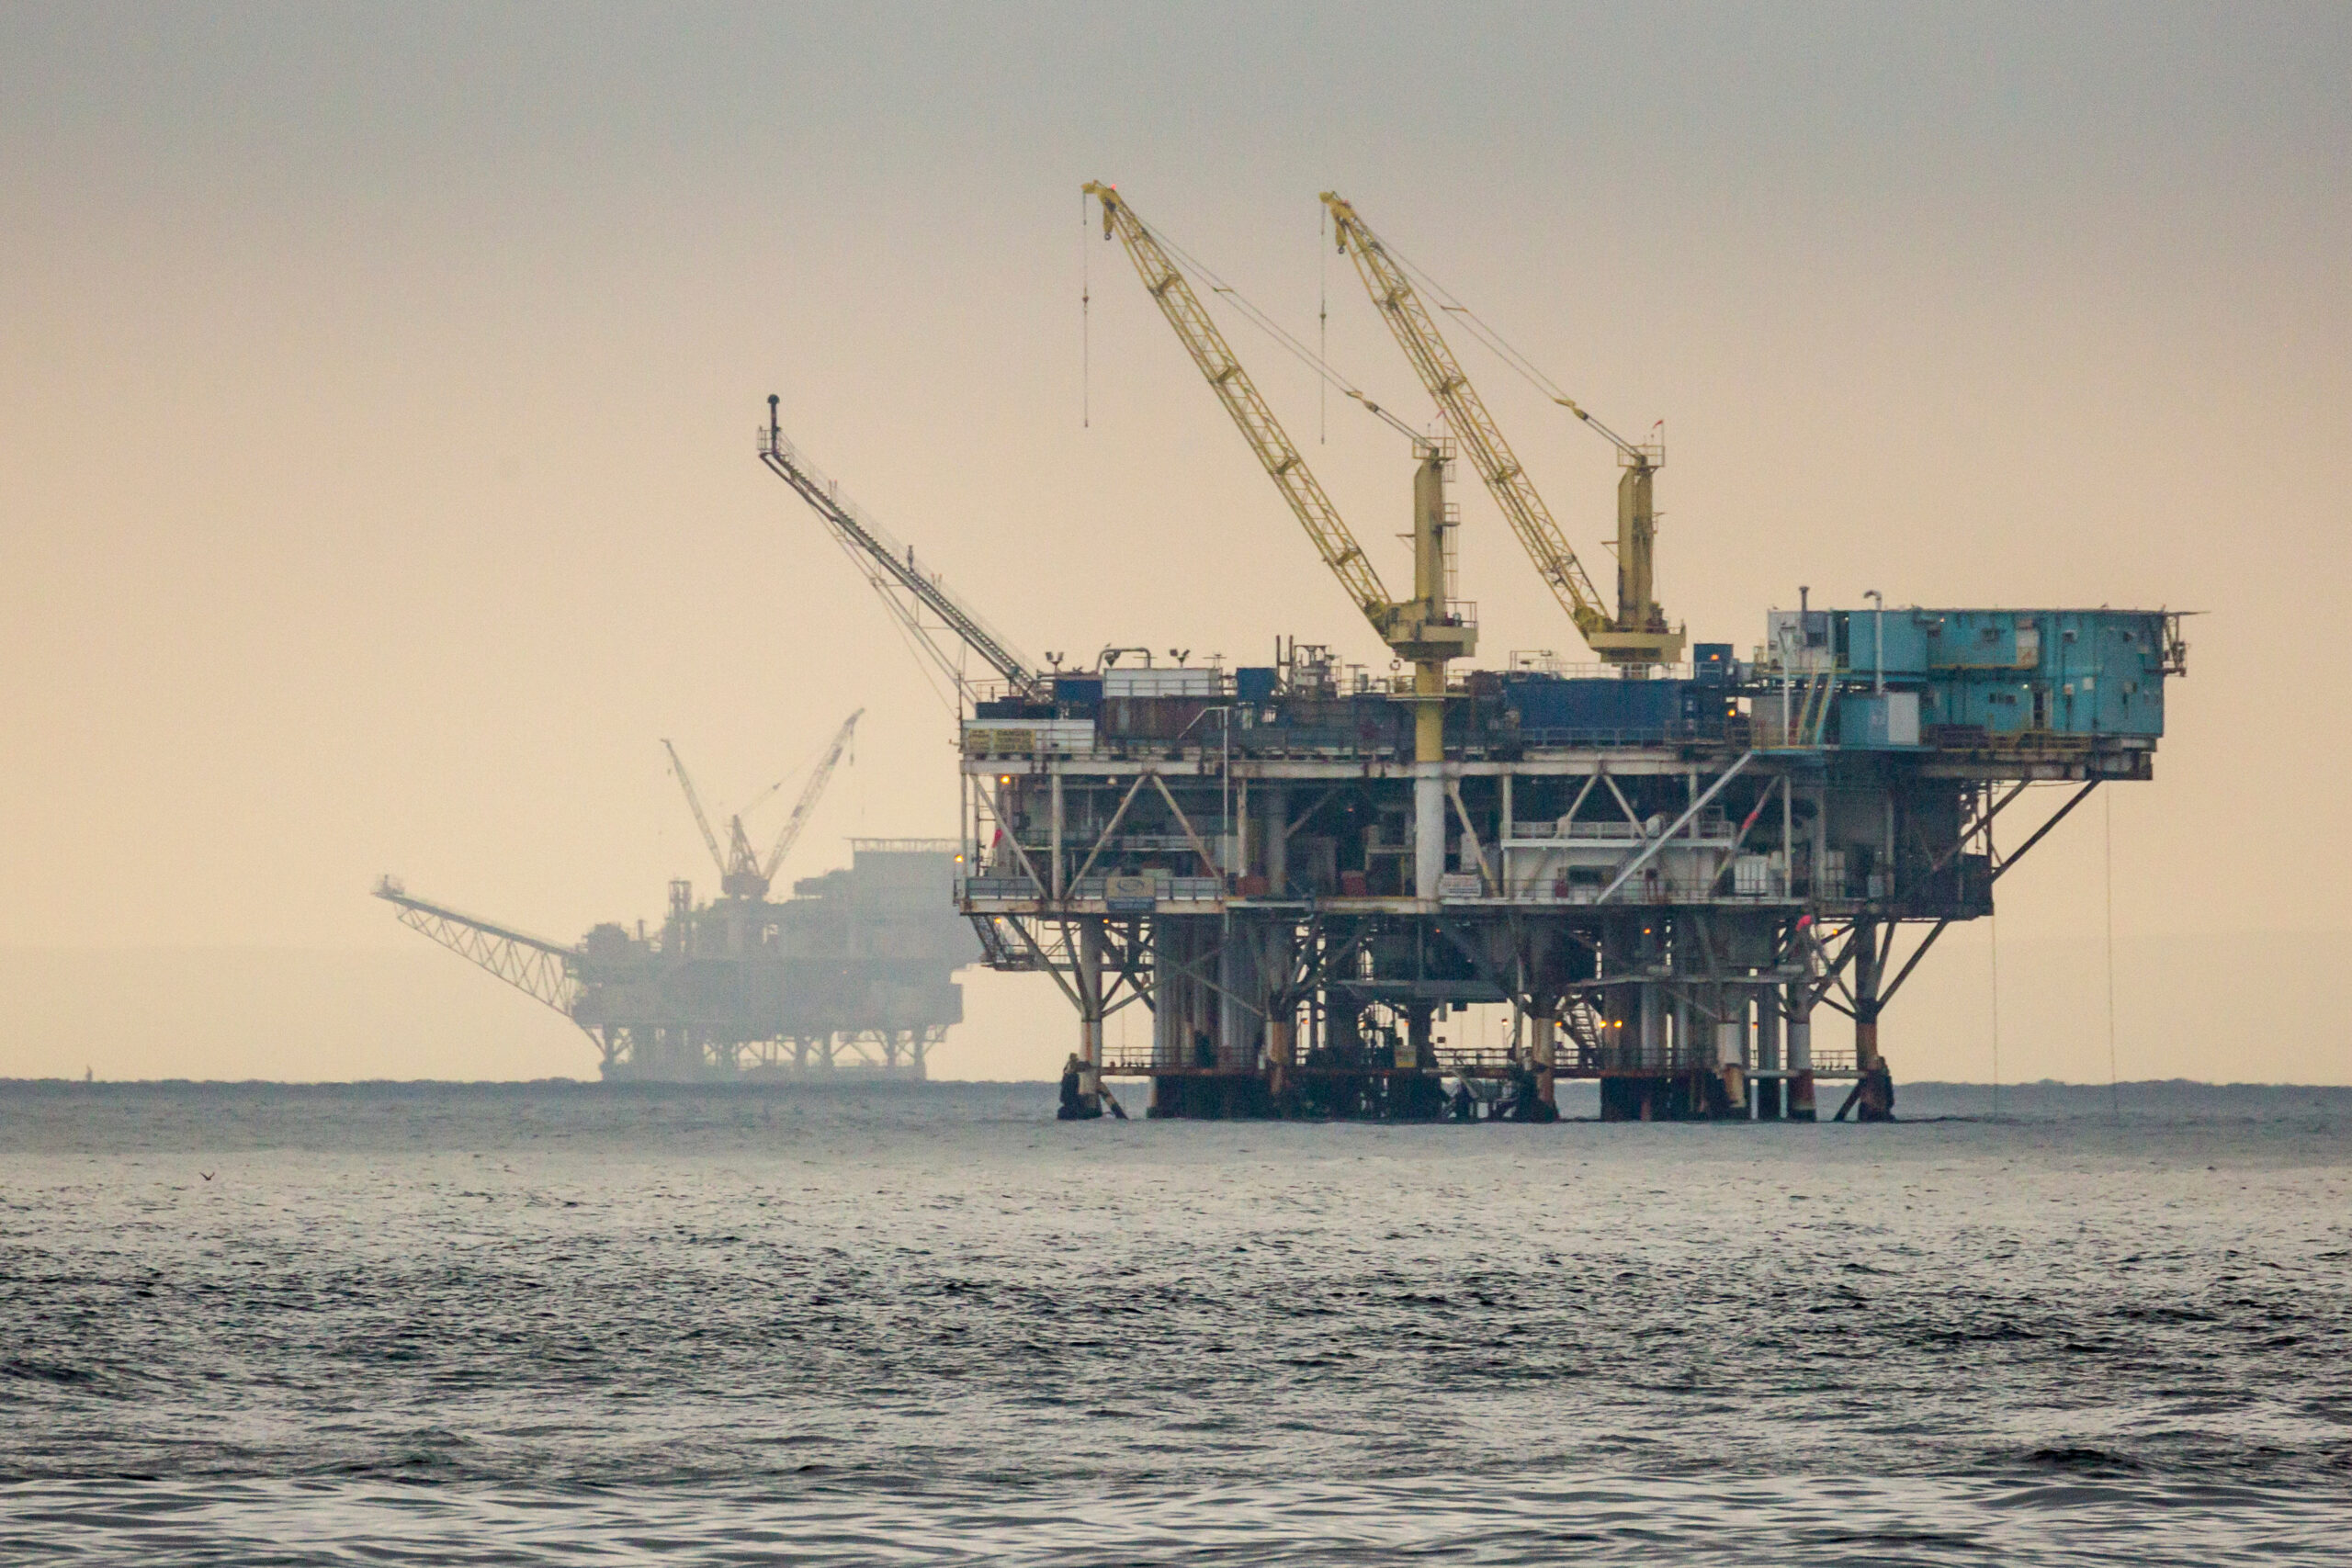 A pair of offshore oil wells off the coast of california